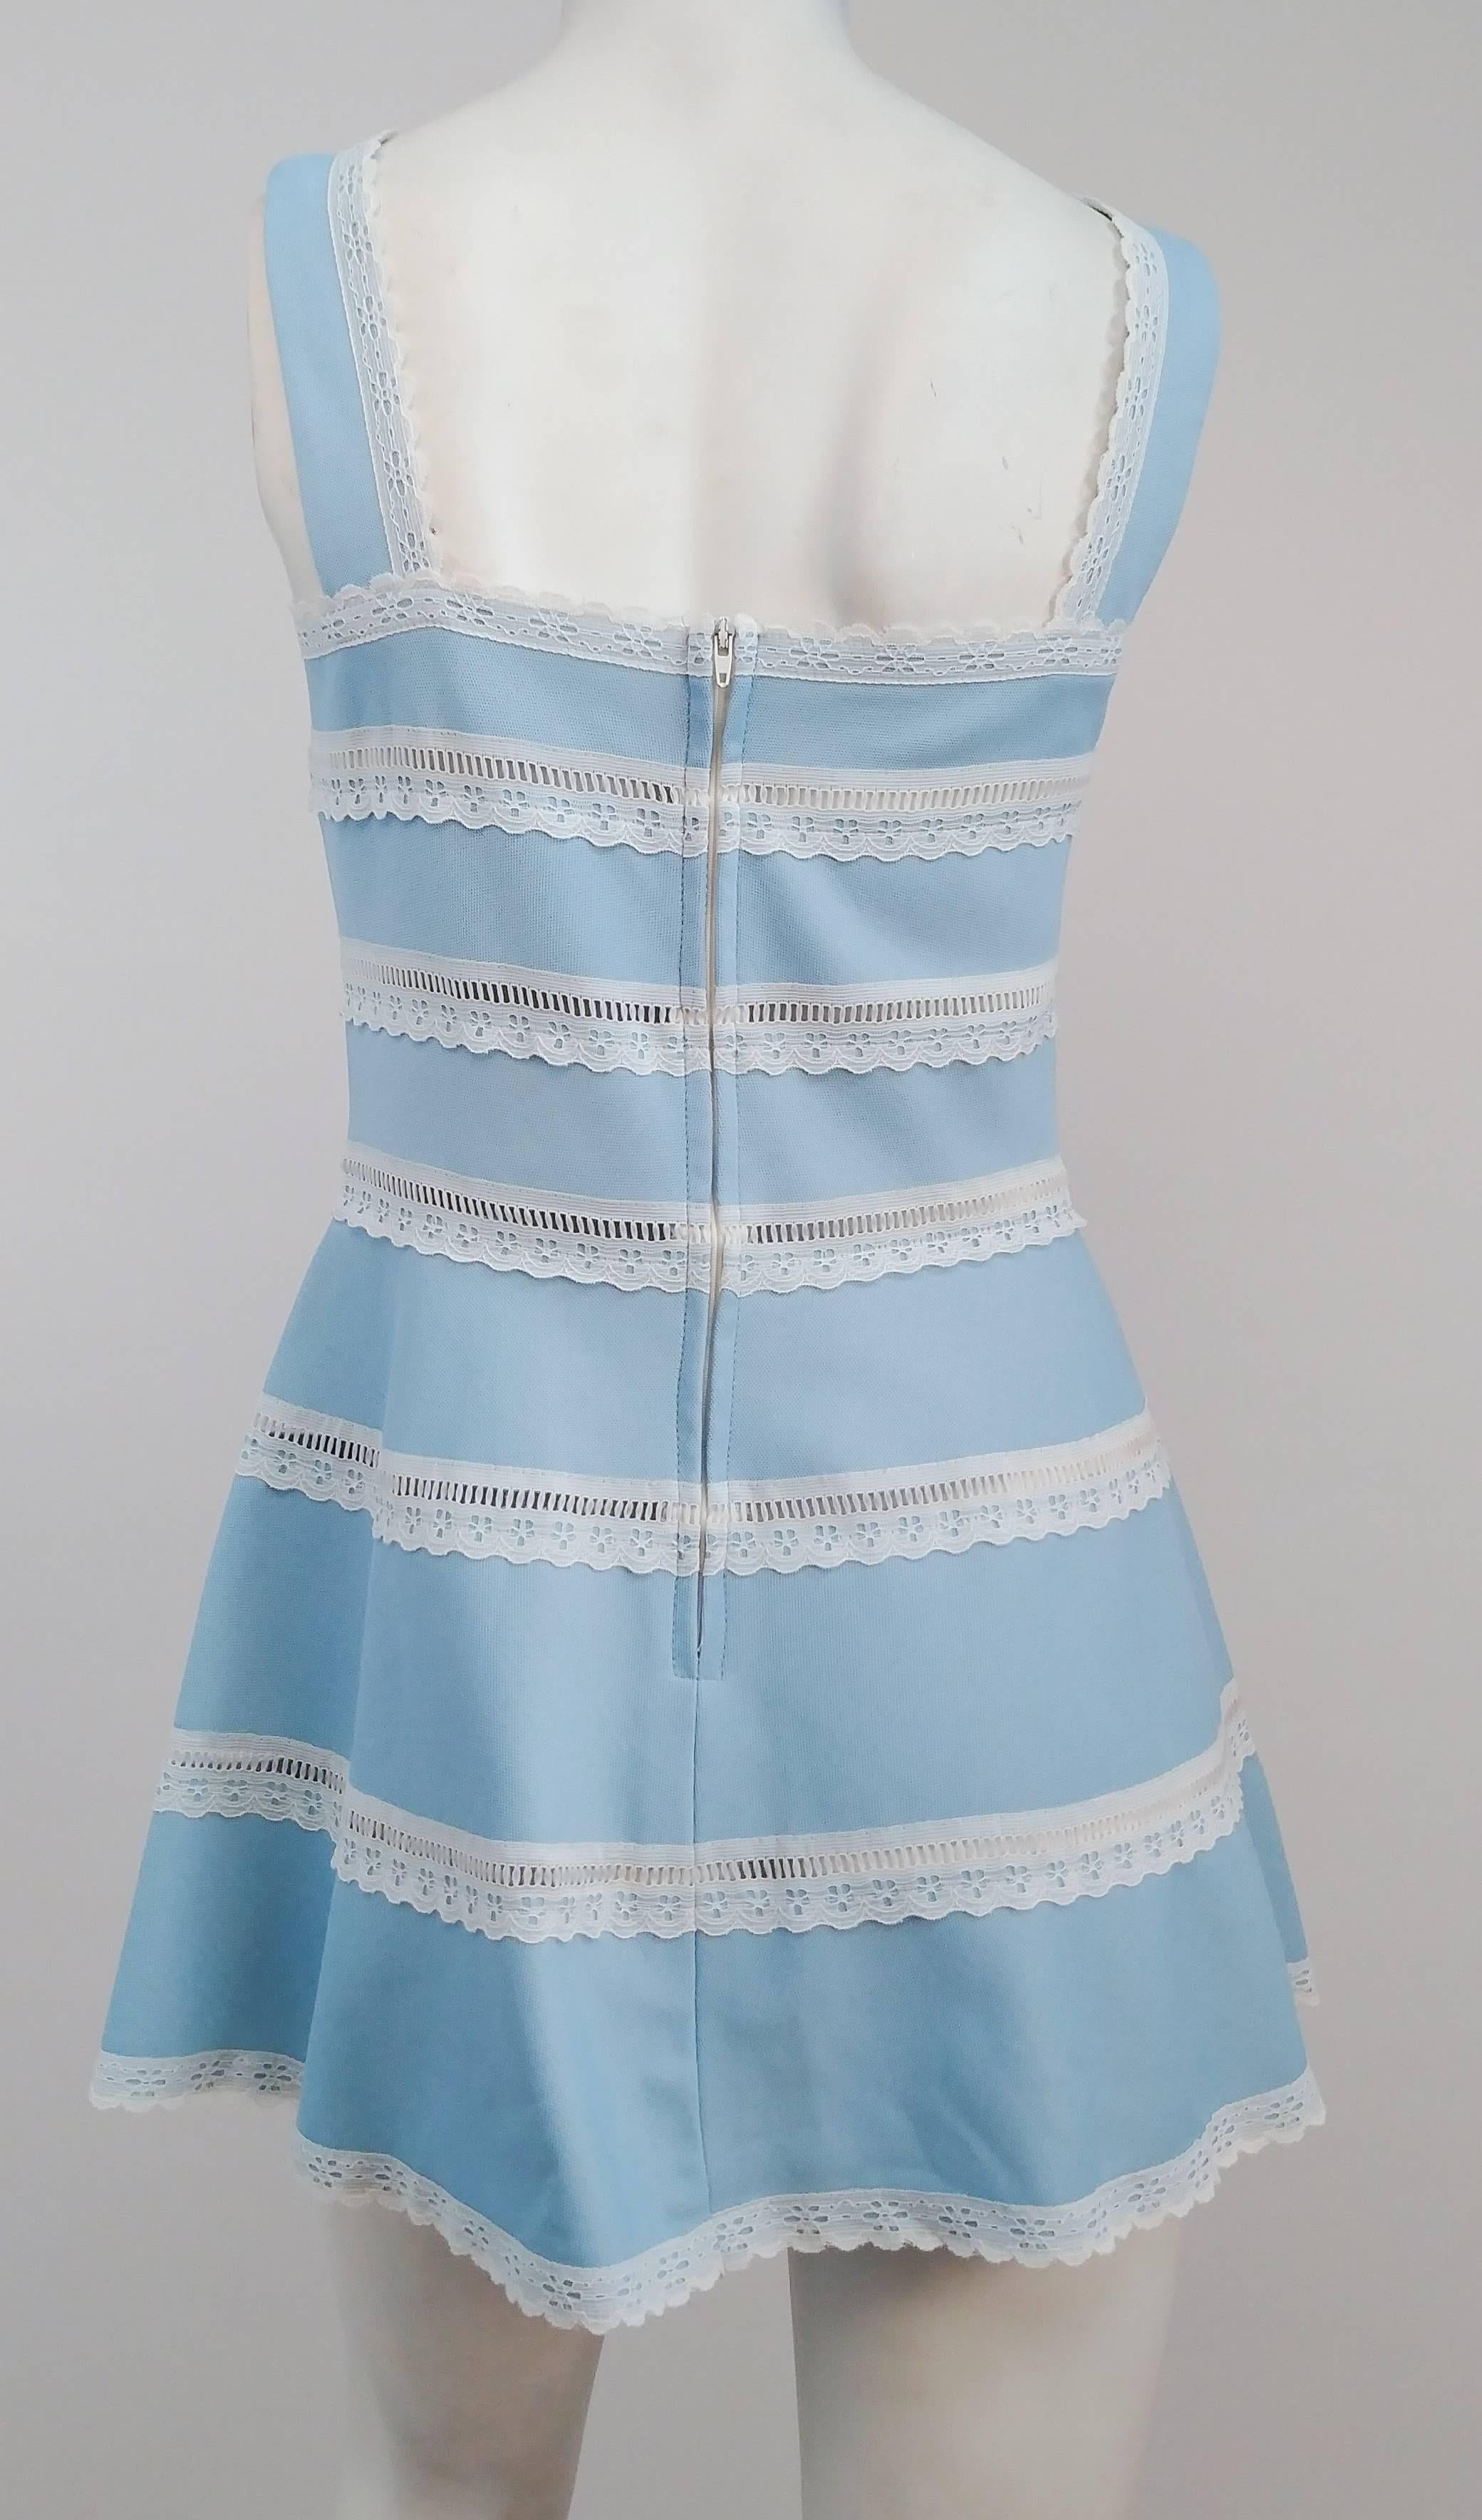 60s Baby Blue & Lace Tennis Dress. Zips up back, unlined. 